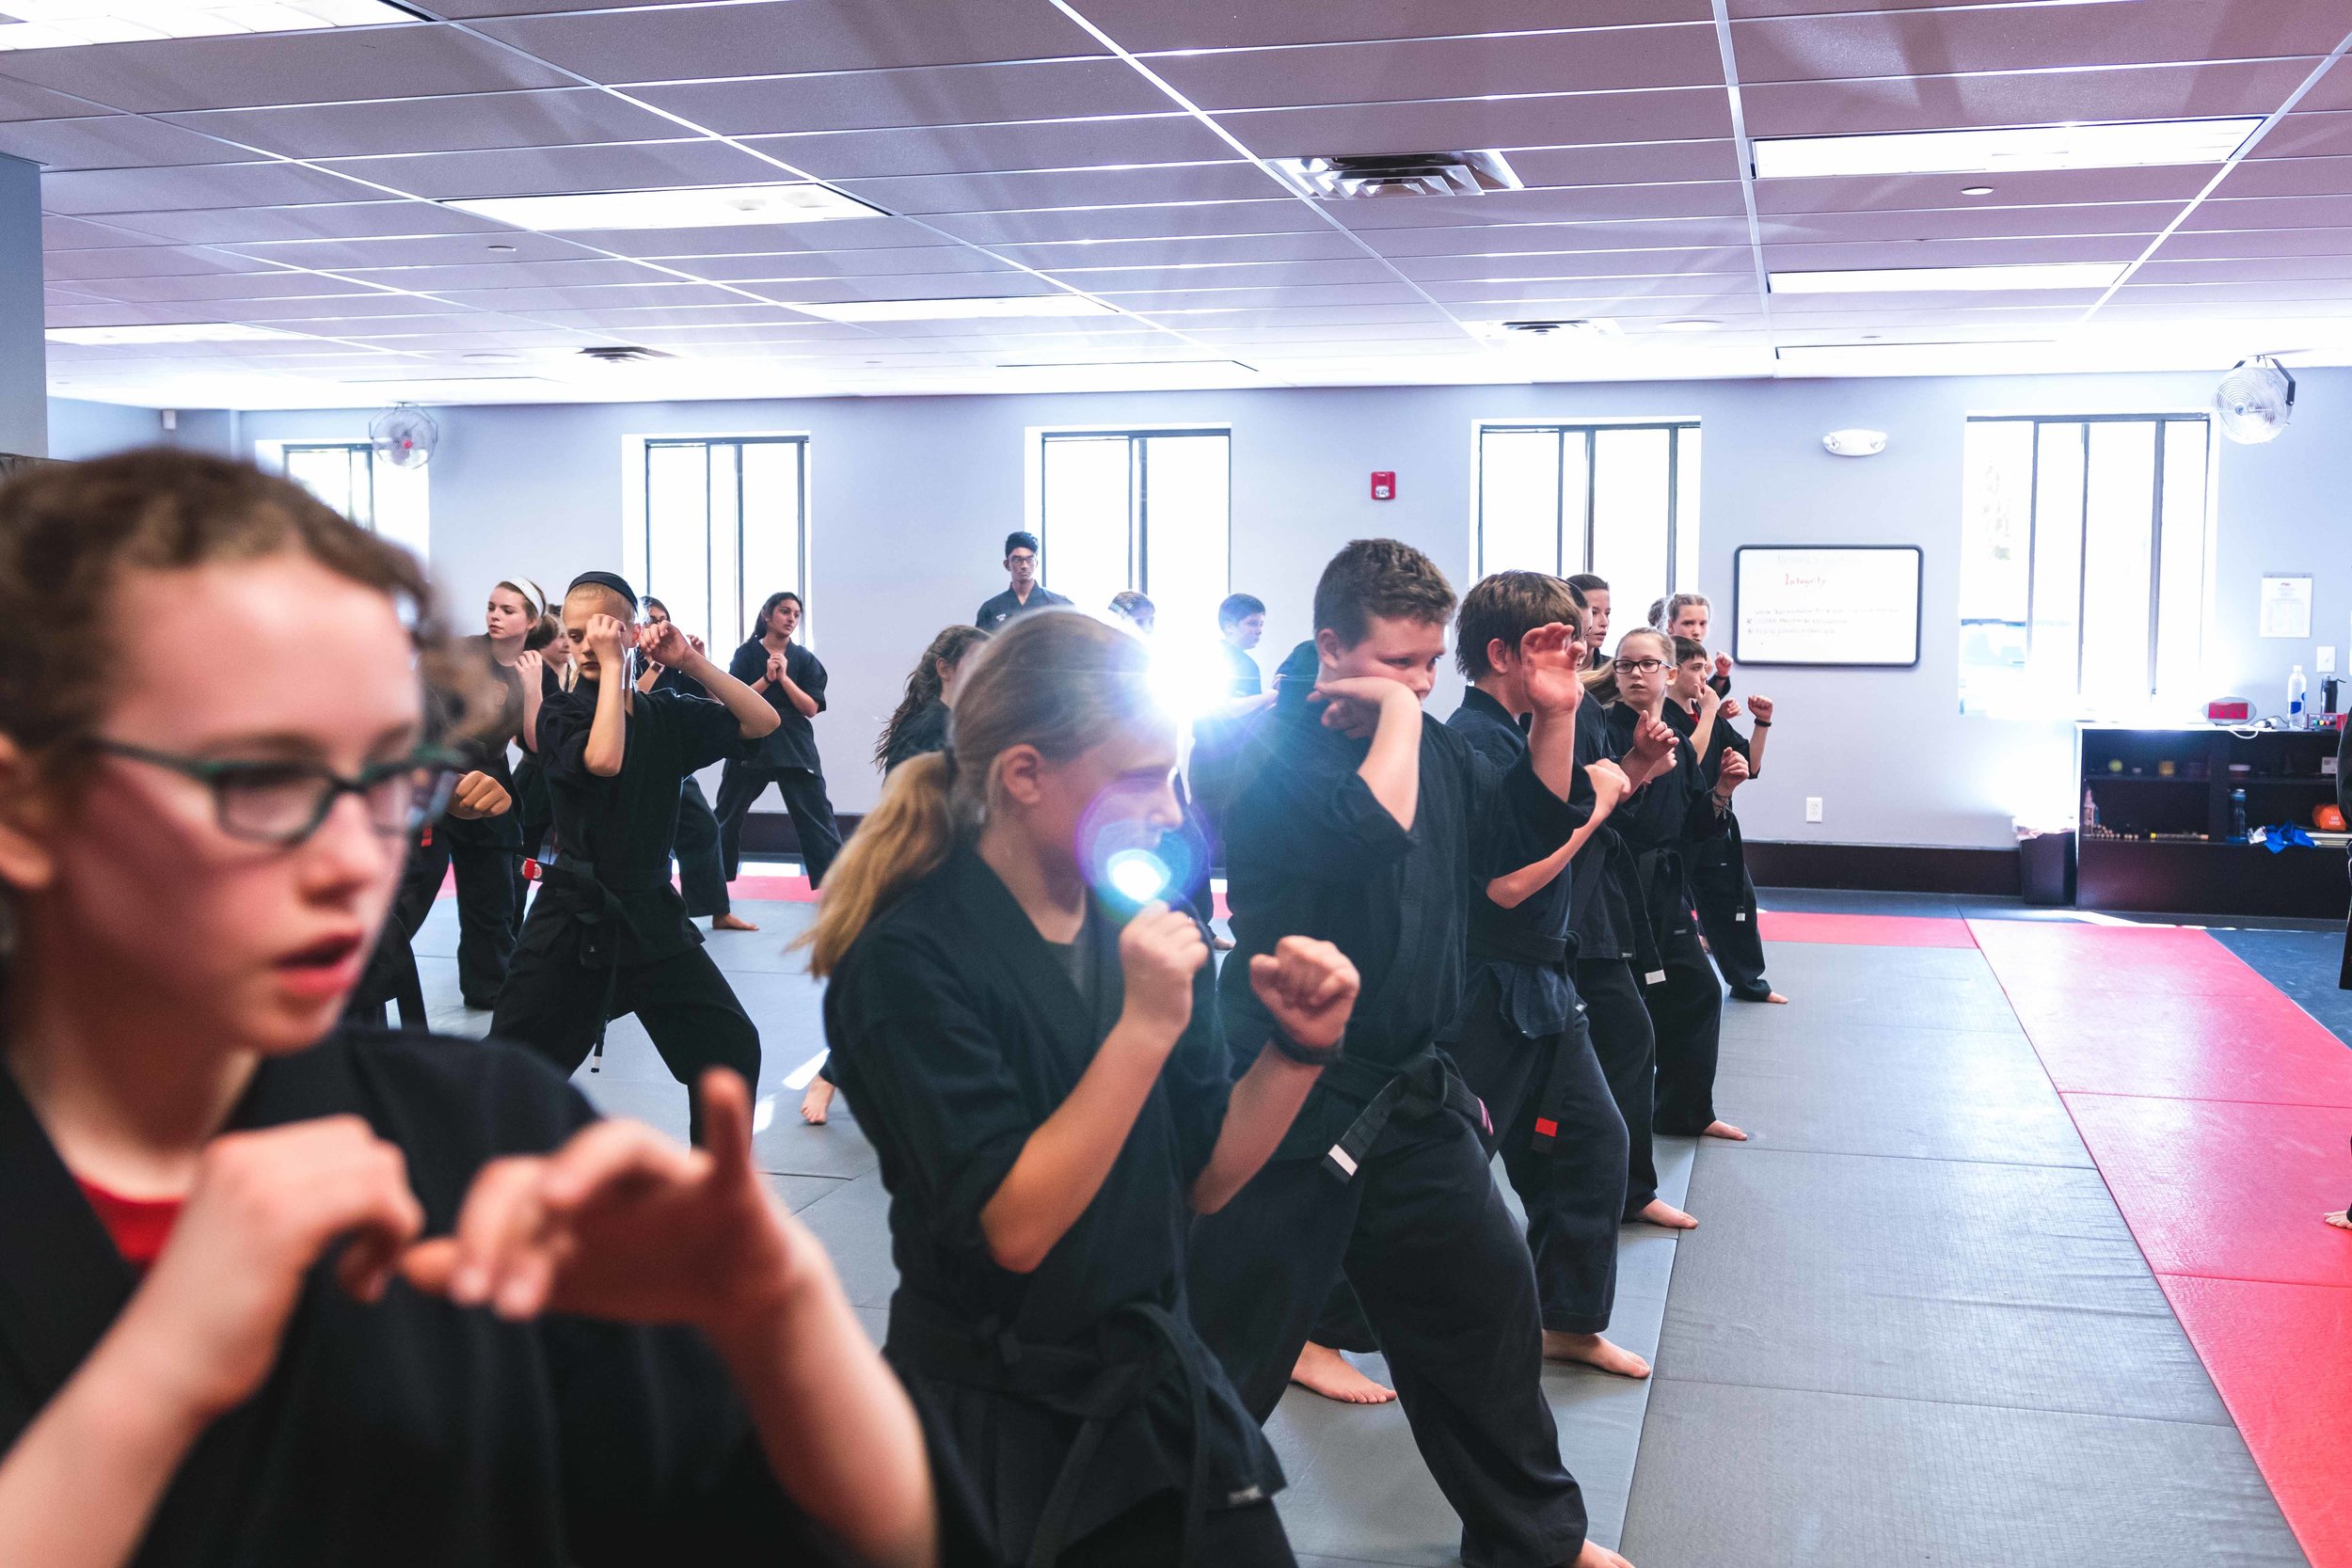 Martial Arts Classes for Kids Ages 7 to 12 in Bedford MA at Callahans Karate 01730.jpg